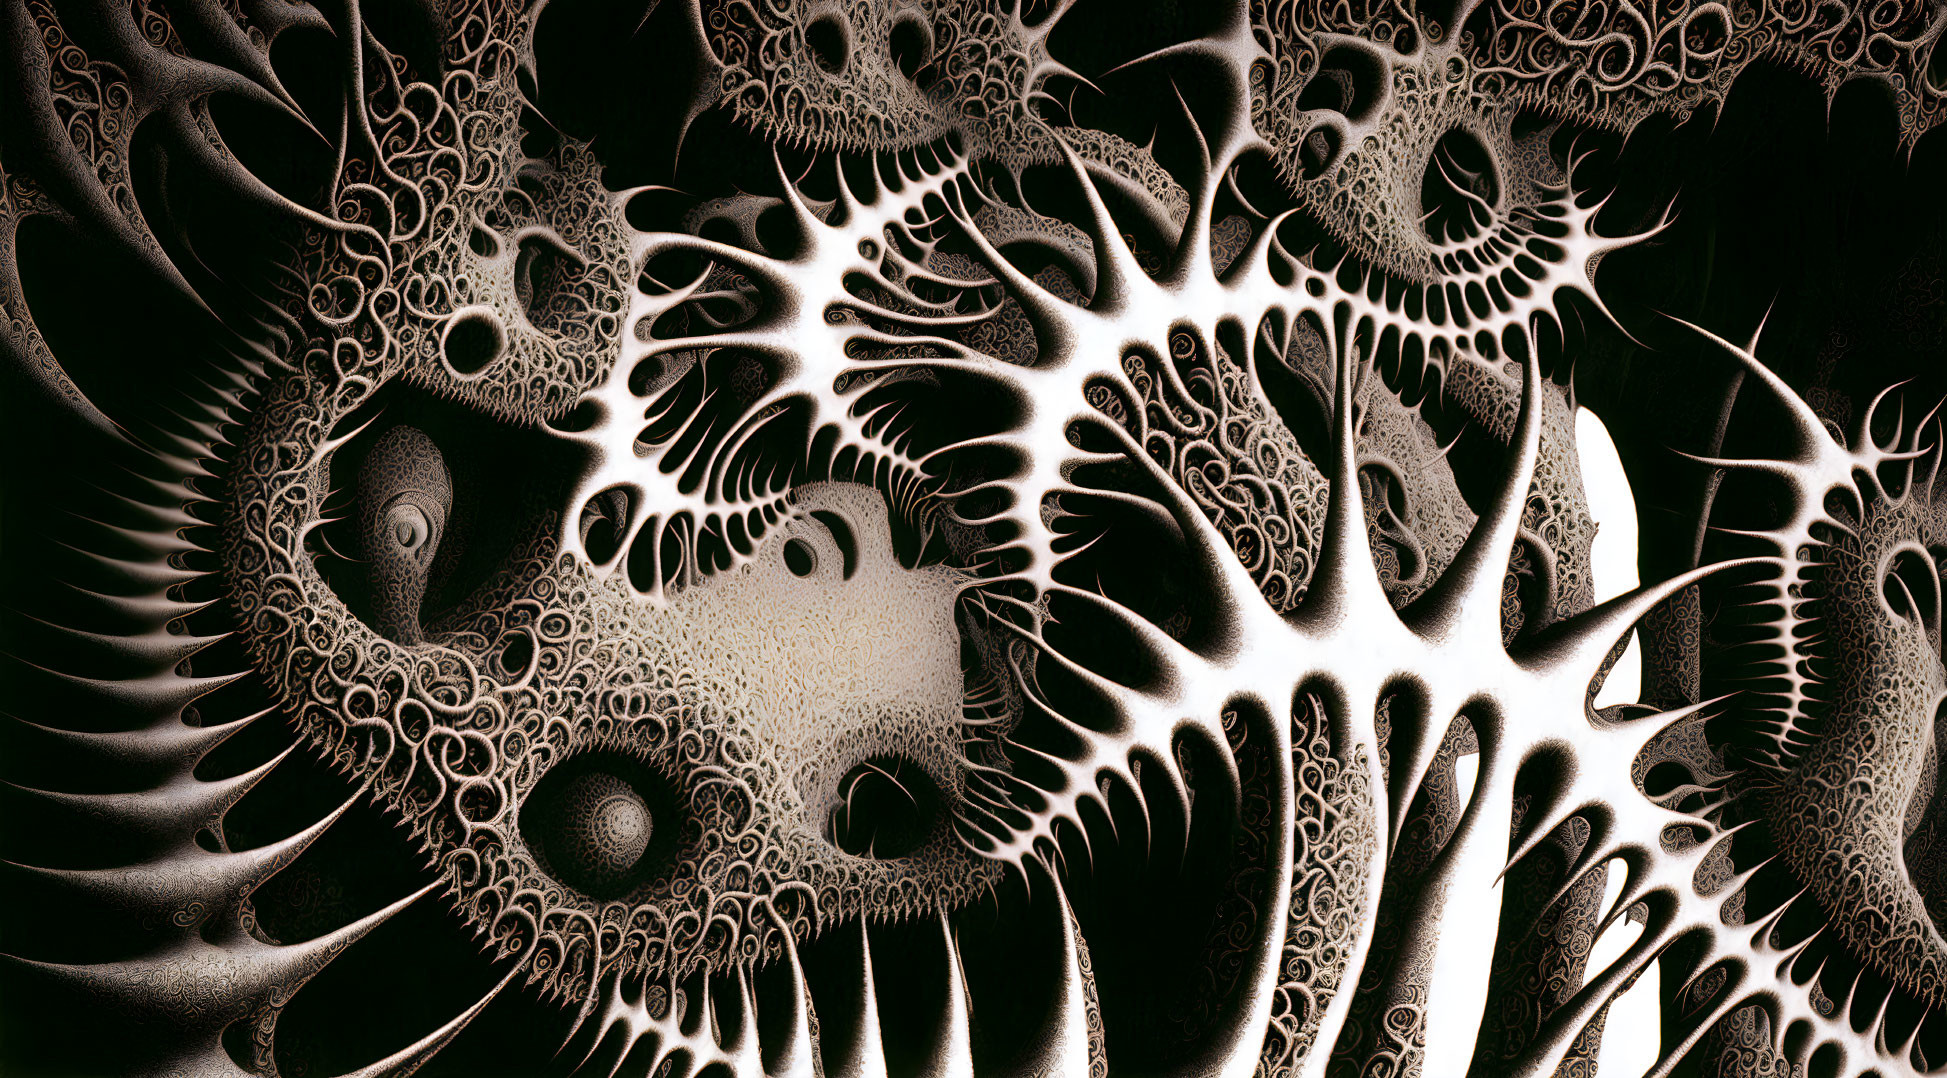 Metallic Fractal Design with Spiral Patterns and Organic Shapes